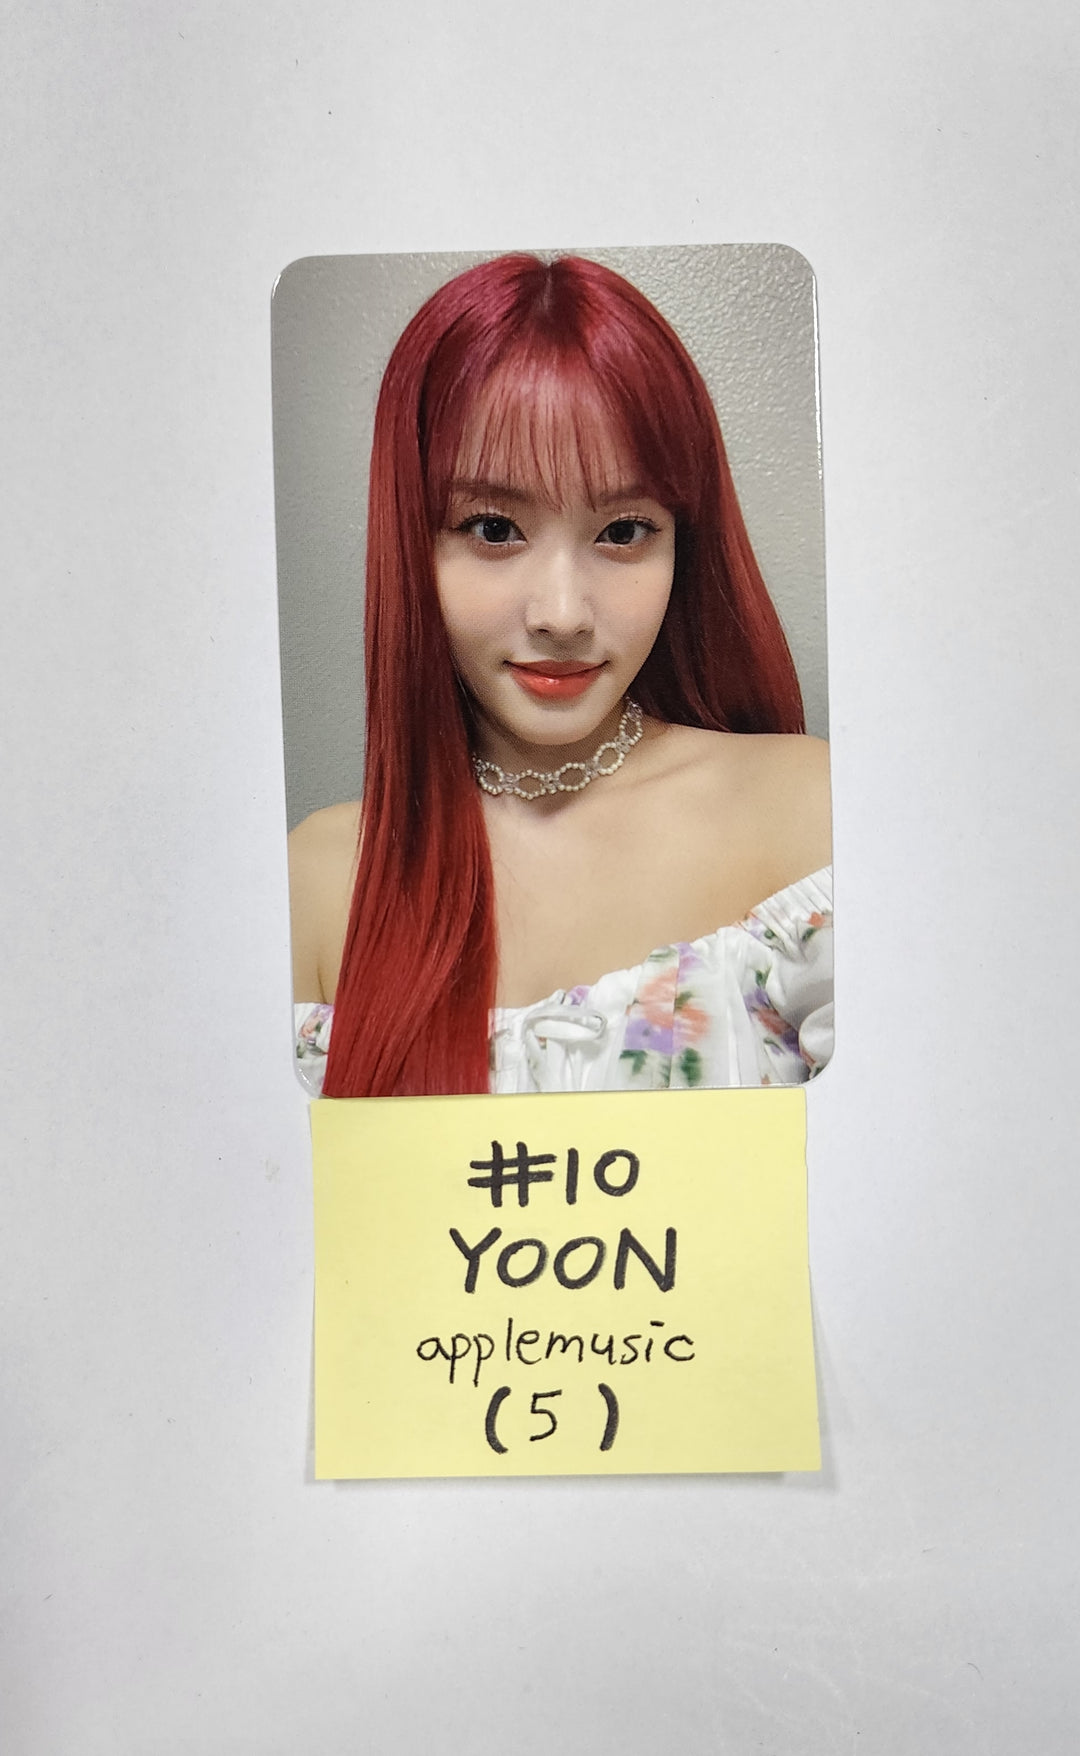 StayC 'WE NEED LOVE' - Apple Music Lucky Draw Event Photocard